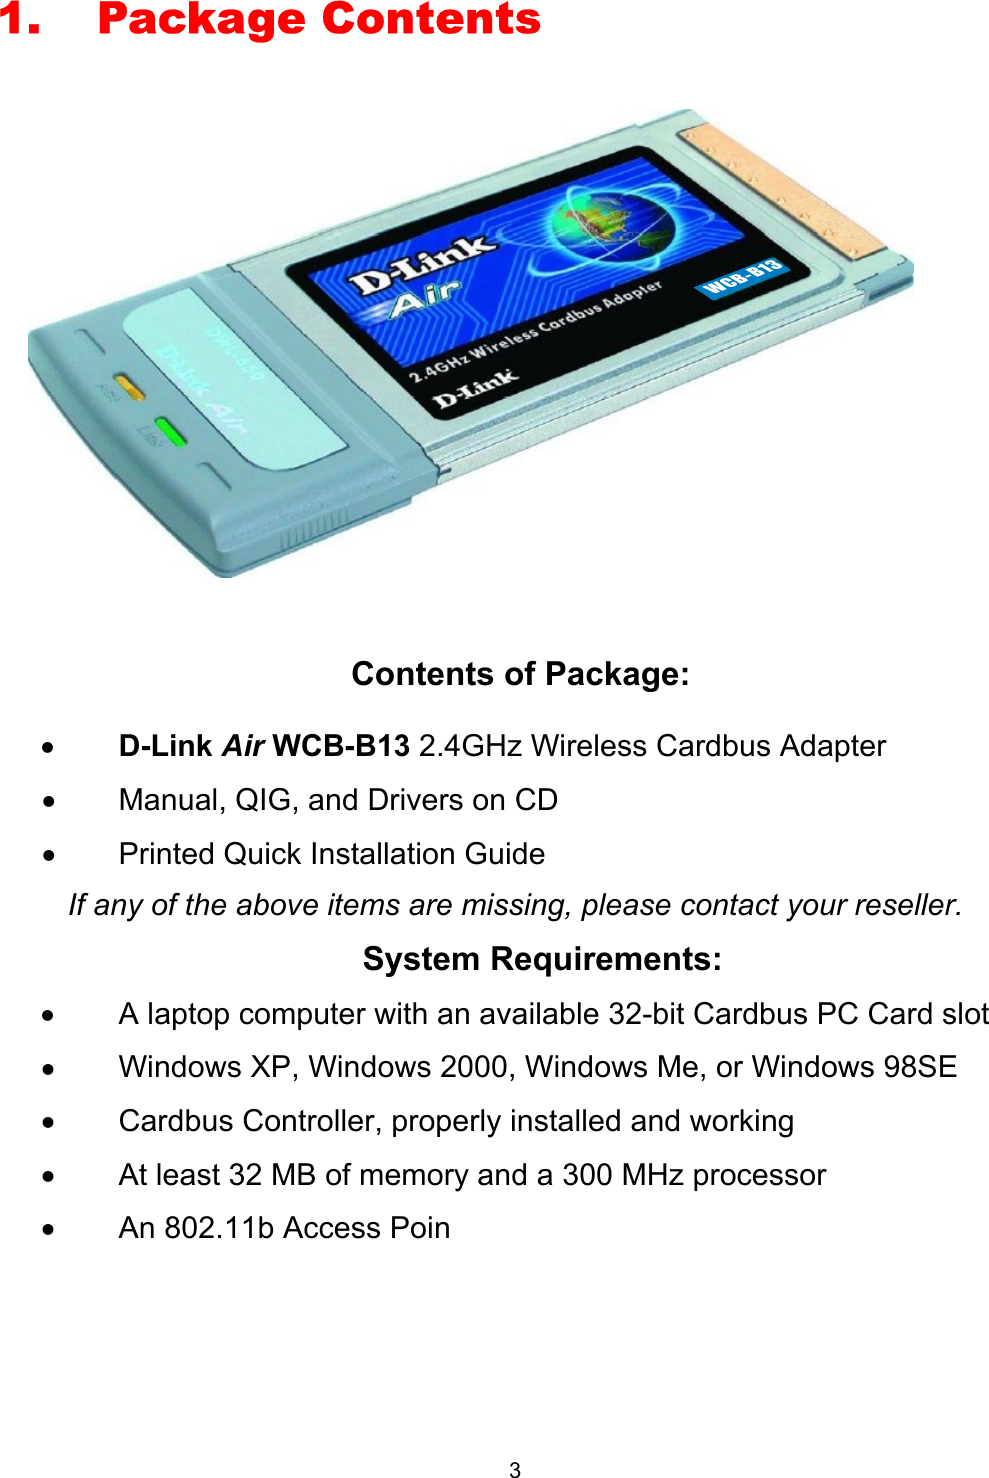  31. Package Contents    Contents of Package: •  D-Link Air WCB-B13 2.4GHz Wireless Cardbus Adapter •  Manual, QIG, and Drivers on CD •  Printed Quick Installation Guide  If any of the above items are missing, please contact your reseller.  System Requirements: •  A laptop computer with an available 32-bit Cardbus PC Card slot •  Windows XP, Windows 2000, Windows Me, or Windows 98SE  •  Cardbus Controller, properly installed and working •  At least 32 MB of memory and a 300 MHz processor  •  An 802.11b Access Poin WCB-B13